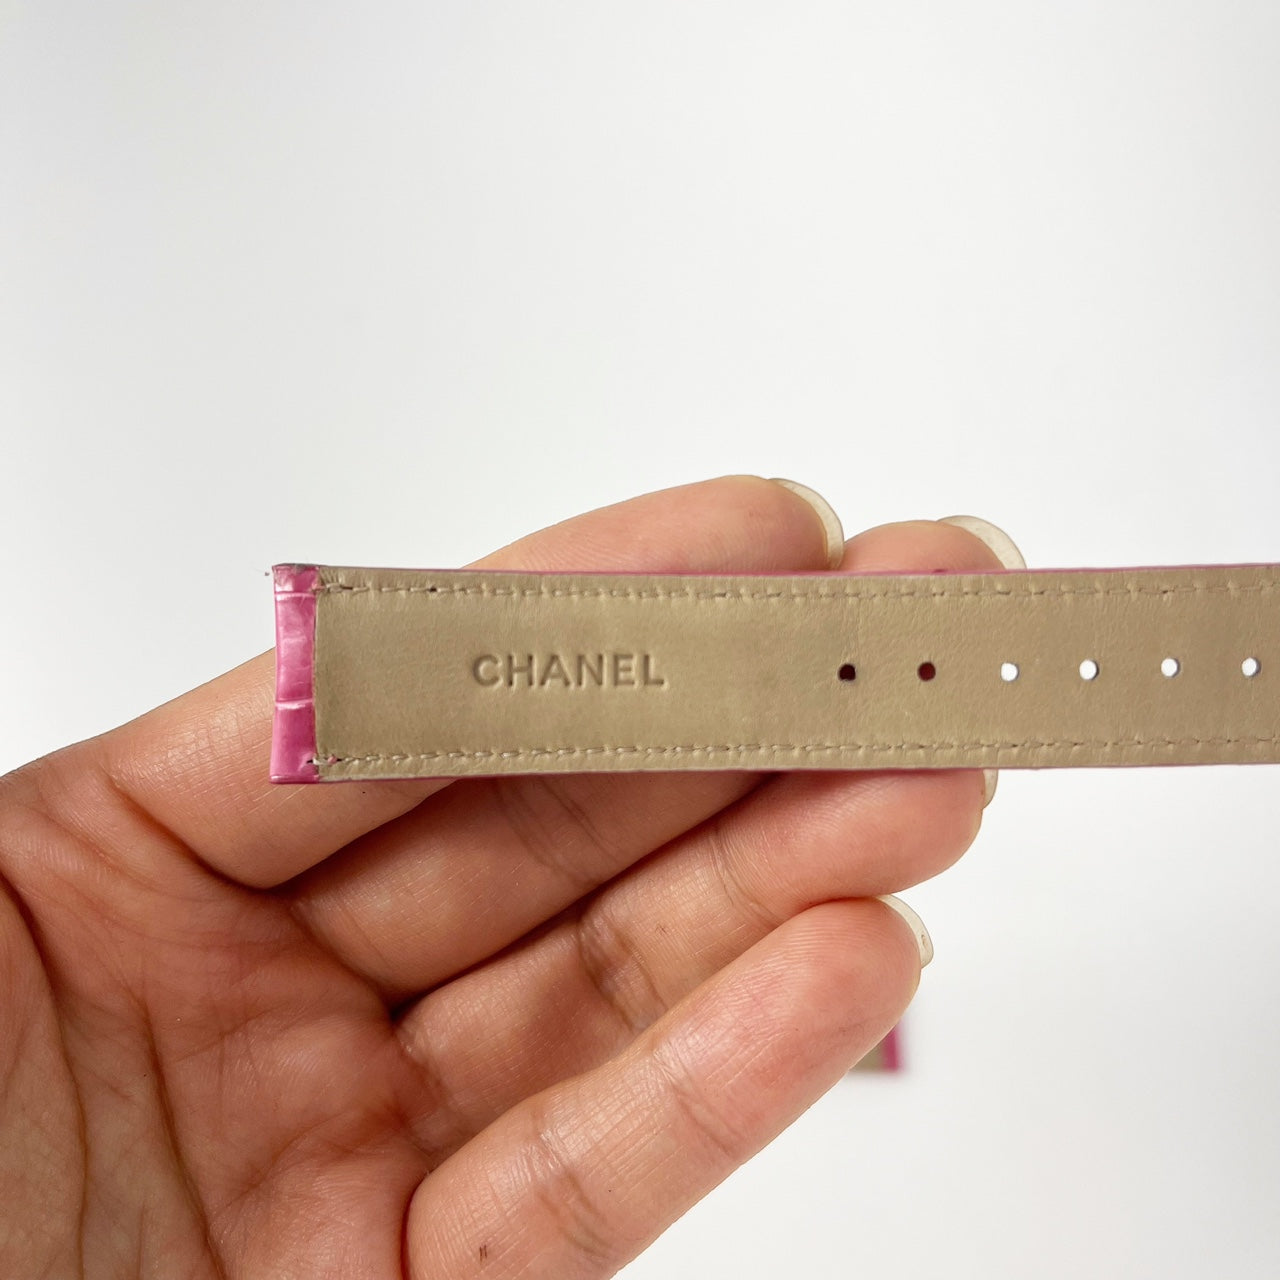 Guarantee Authentic Chanel Alligator Genuine Leather Strap Pink 18mmx16mm Watch Band